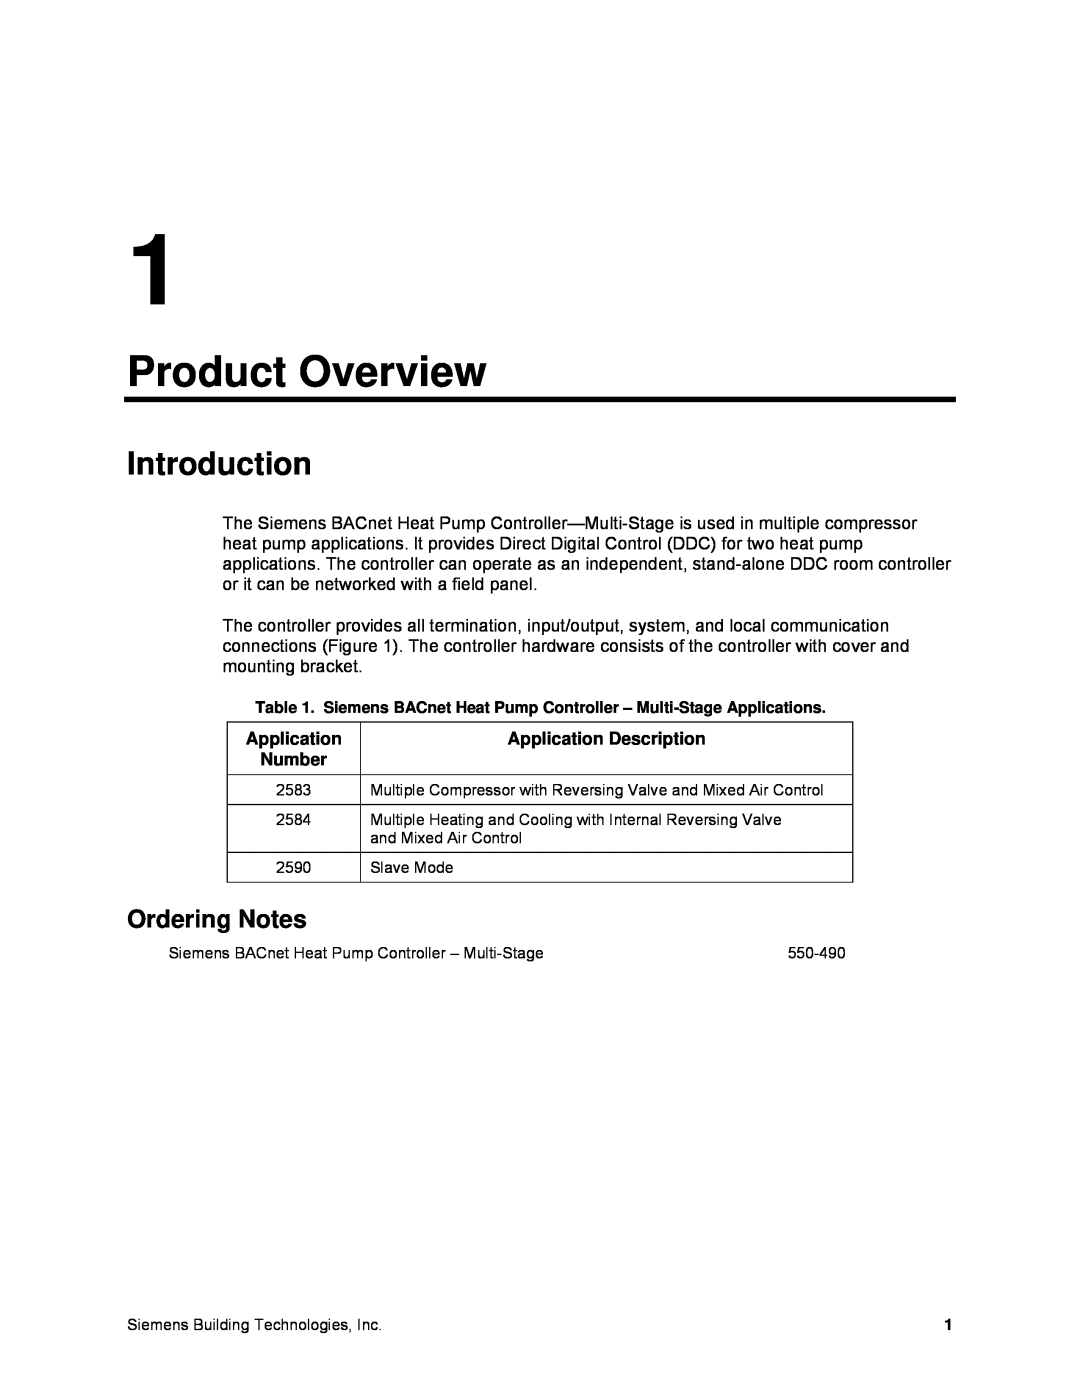 Siemens 125-699 owner manual Product Overview, Introduction, Ordering Notes 